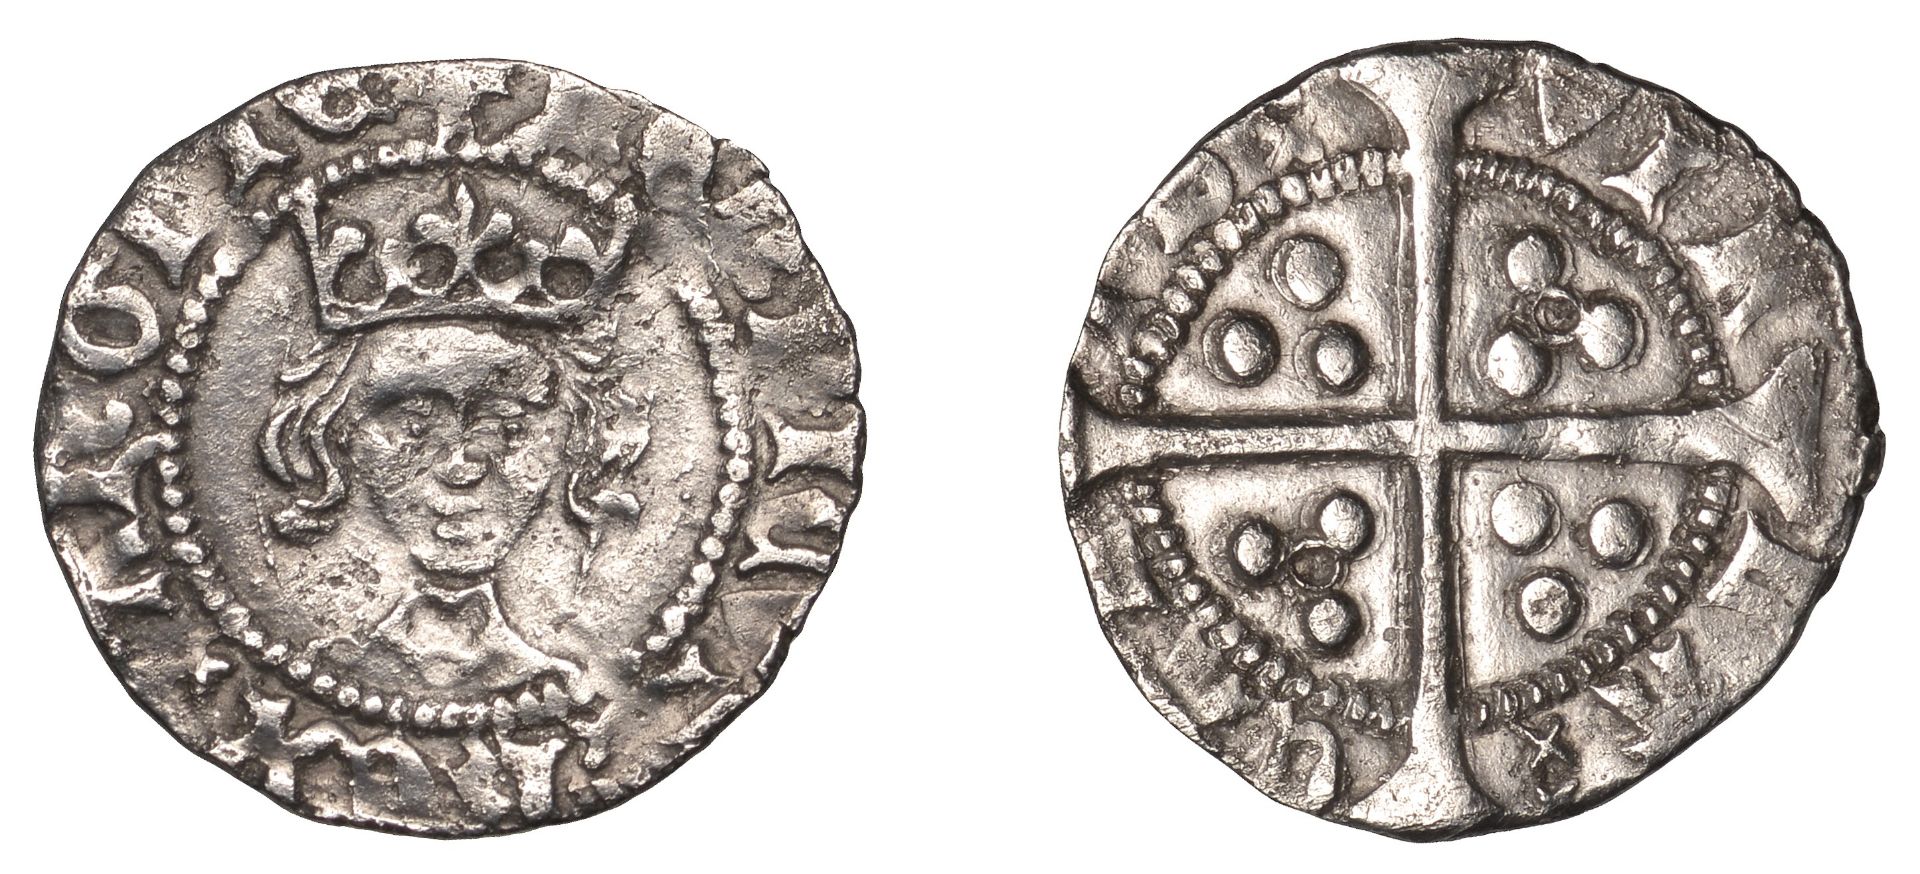 Henry VI (First reign, 1422-1461), Annulet issue, Penny, London/Calais mule, mm. cross V on...